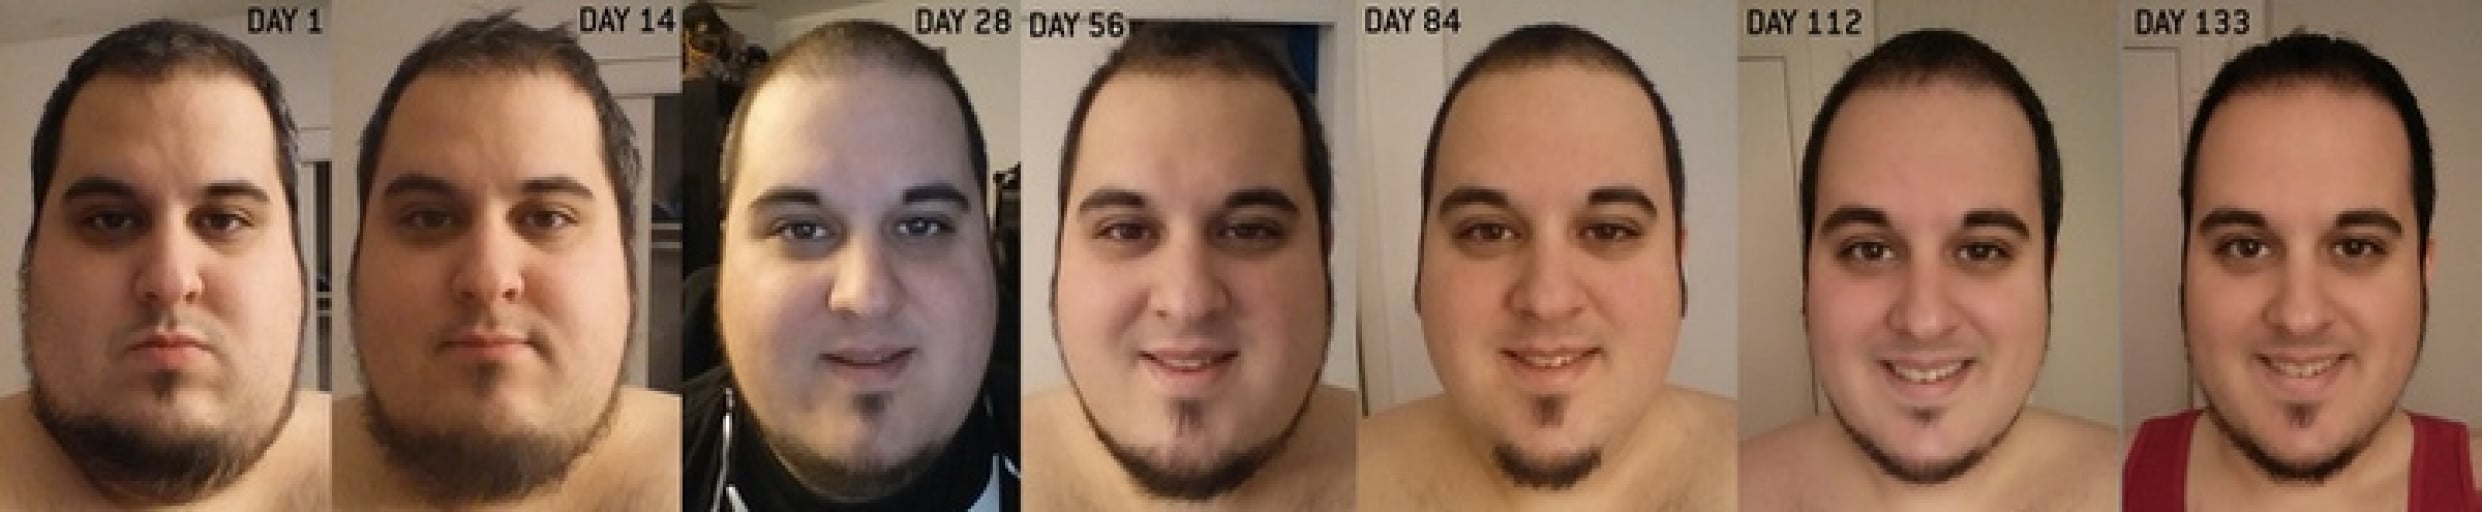 70Lb Weight Loss Journey: How a Reddit User Went From 280Lbs to 210Lbs in 19 Weeks